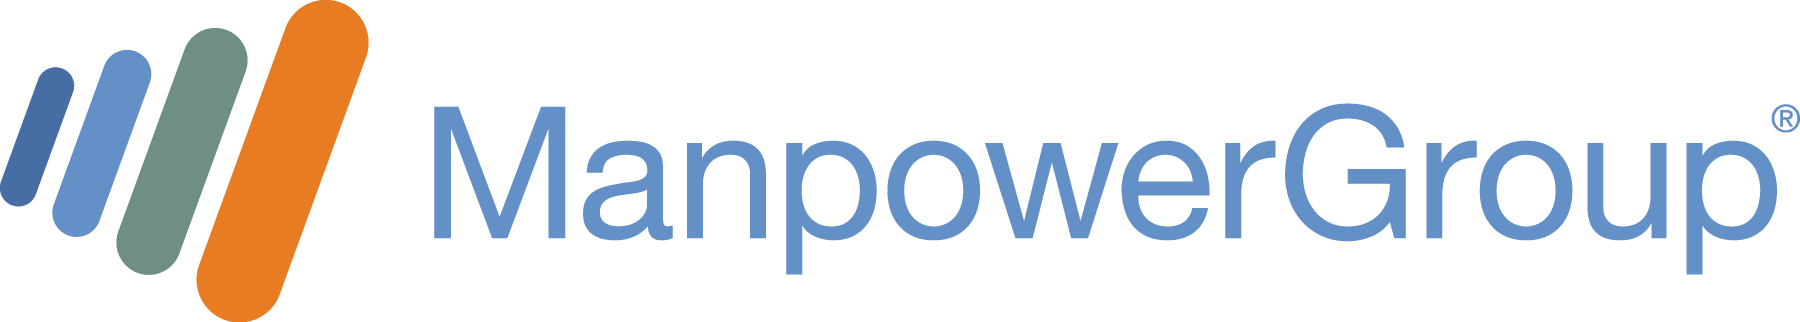 Learn more about the ManpowerGroup family of brands